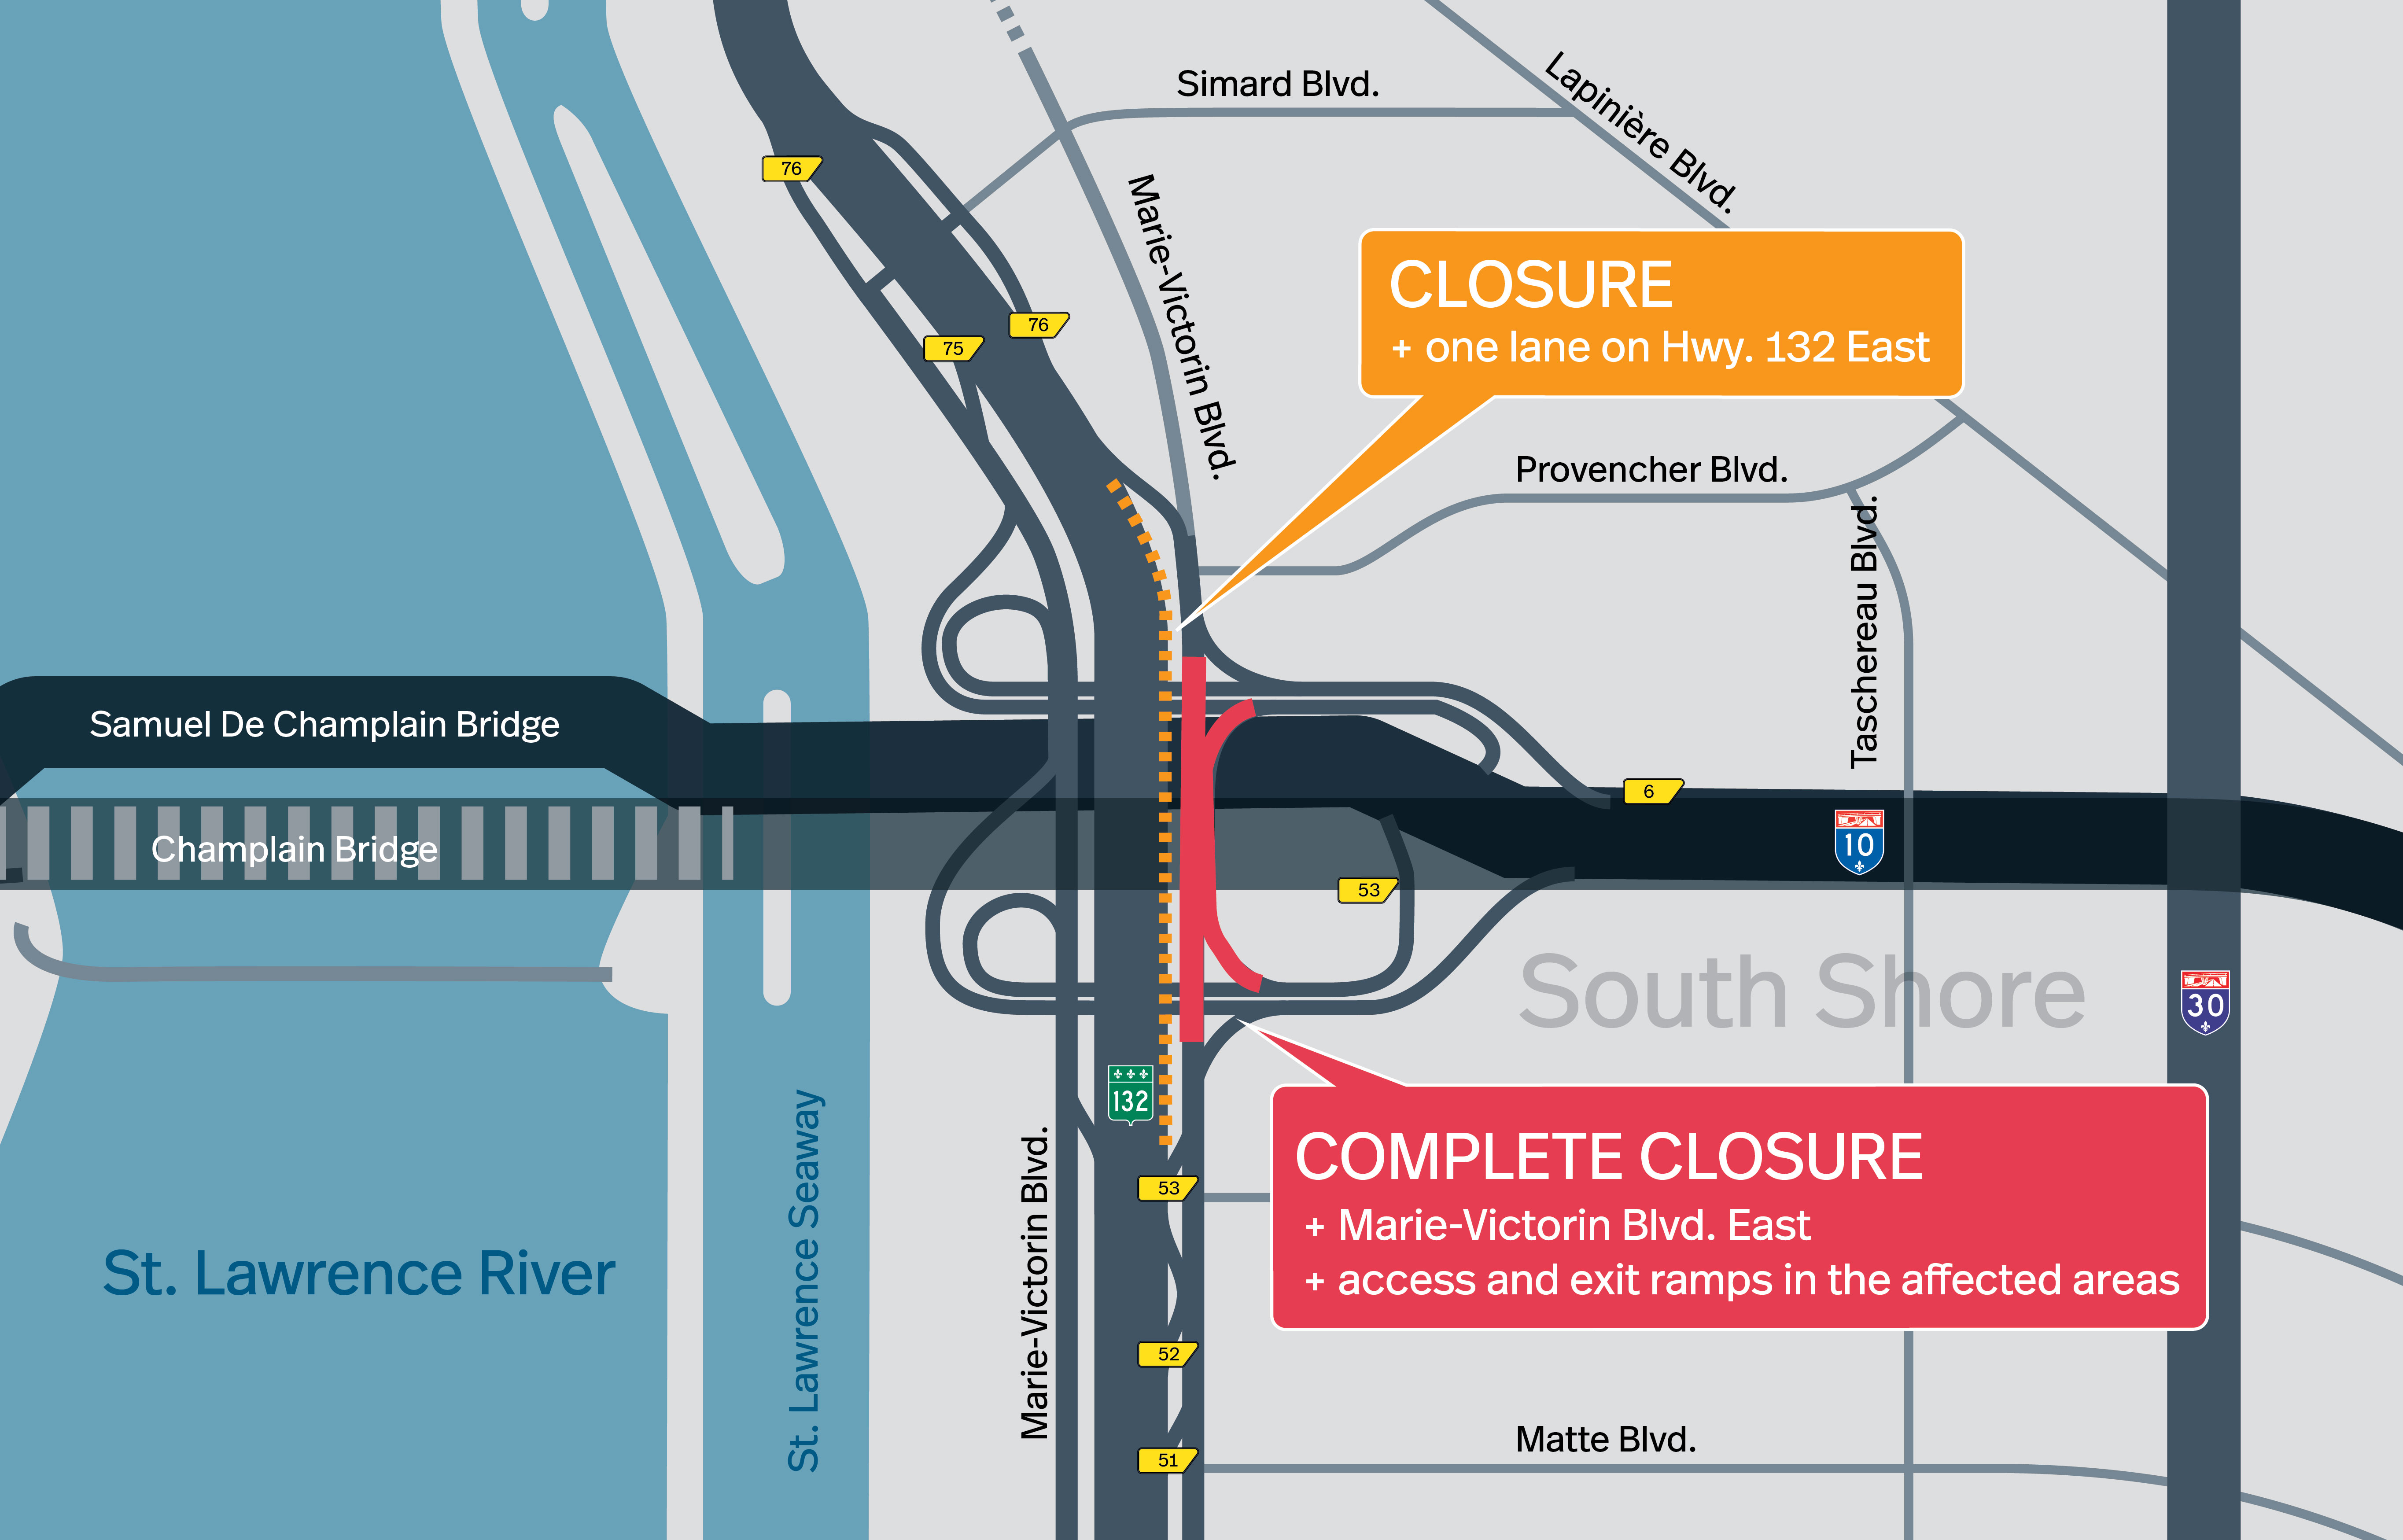 Brossard Sector | Complete closure of Marie-Victorin Blvd. East under the original Champlain Bridge, from November 18 to 20